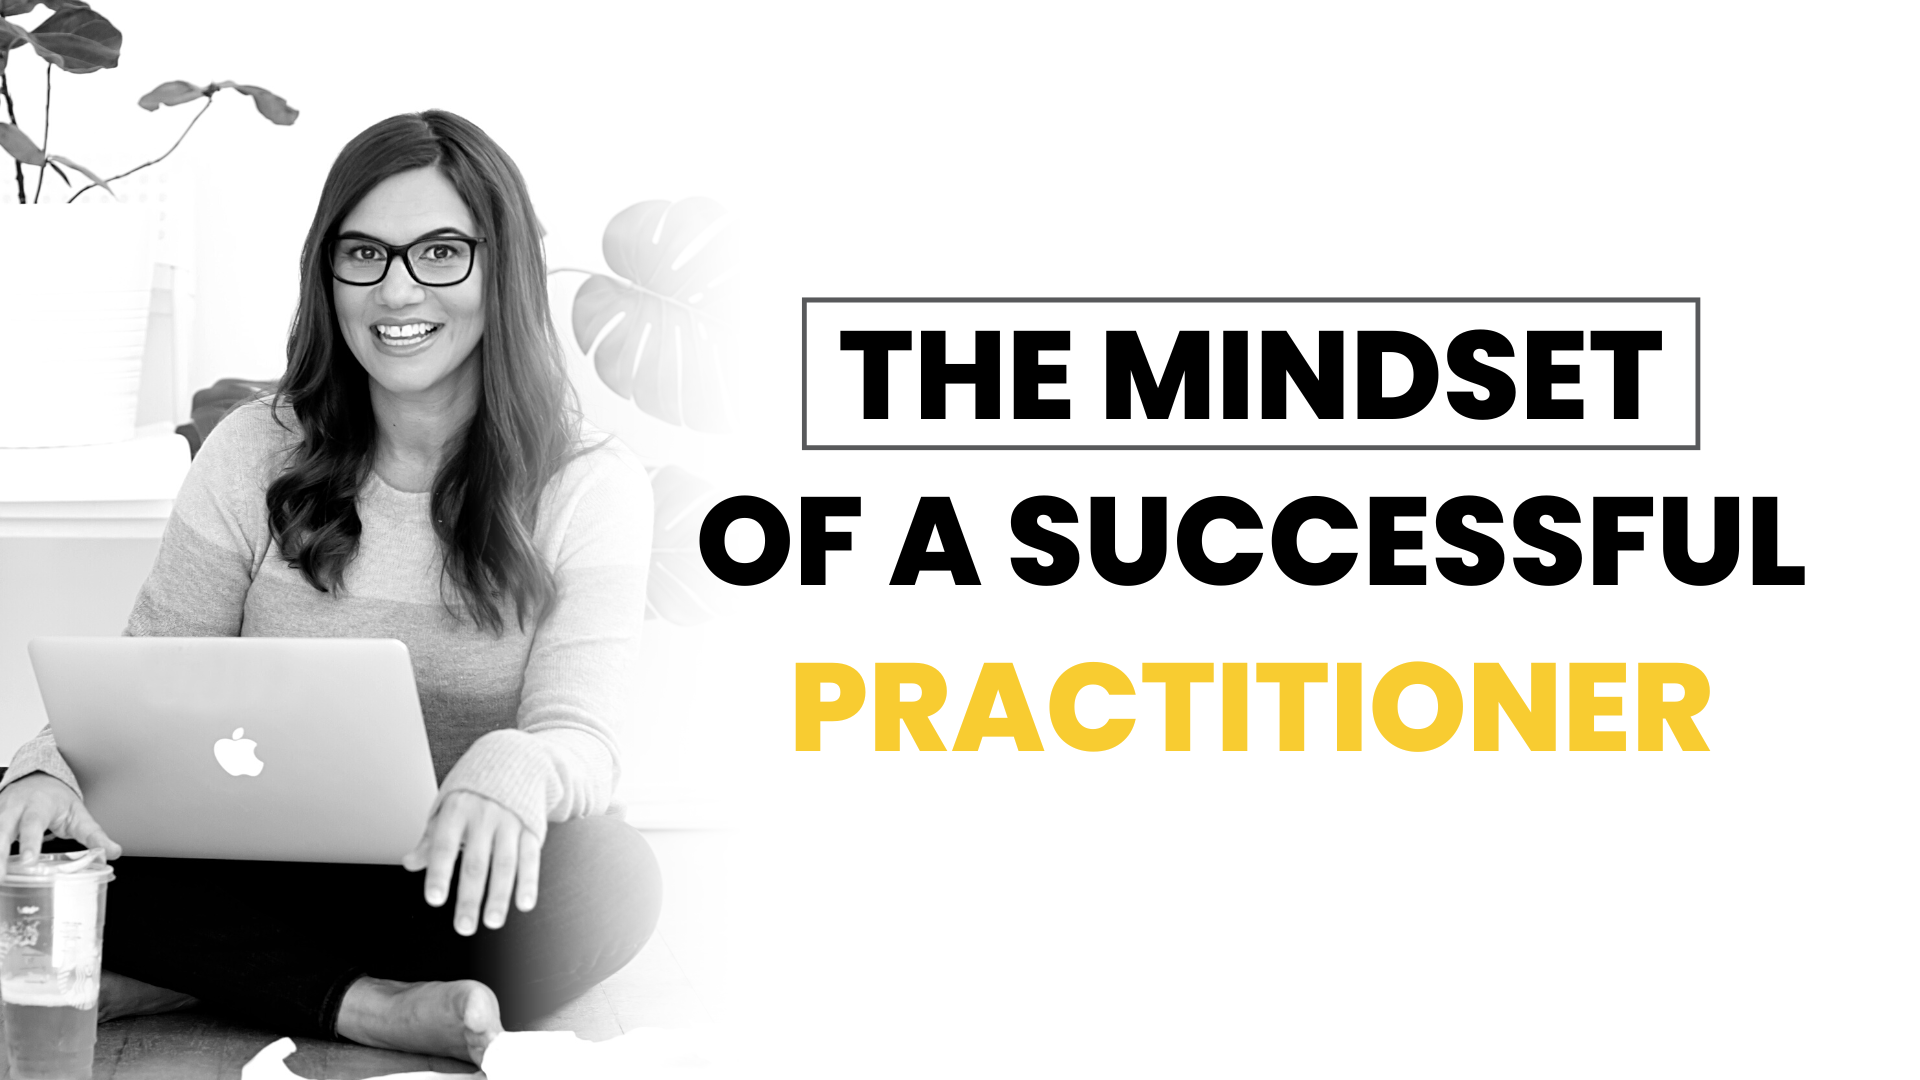 The mindset of a successful practitioner